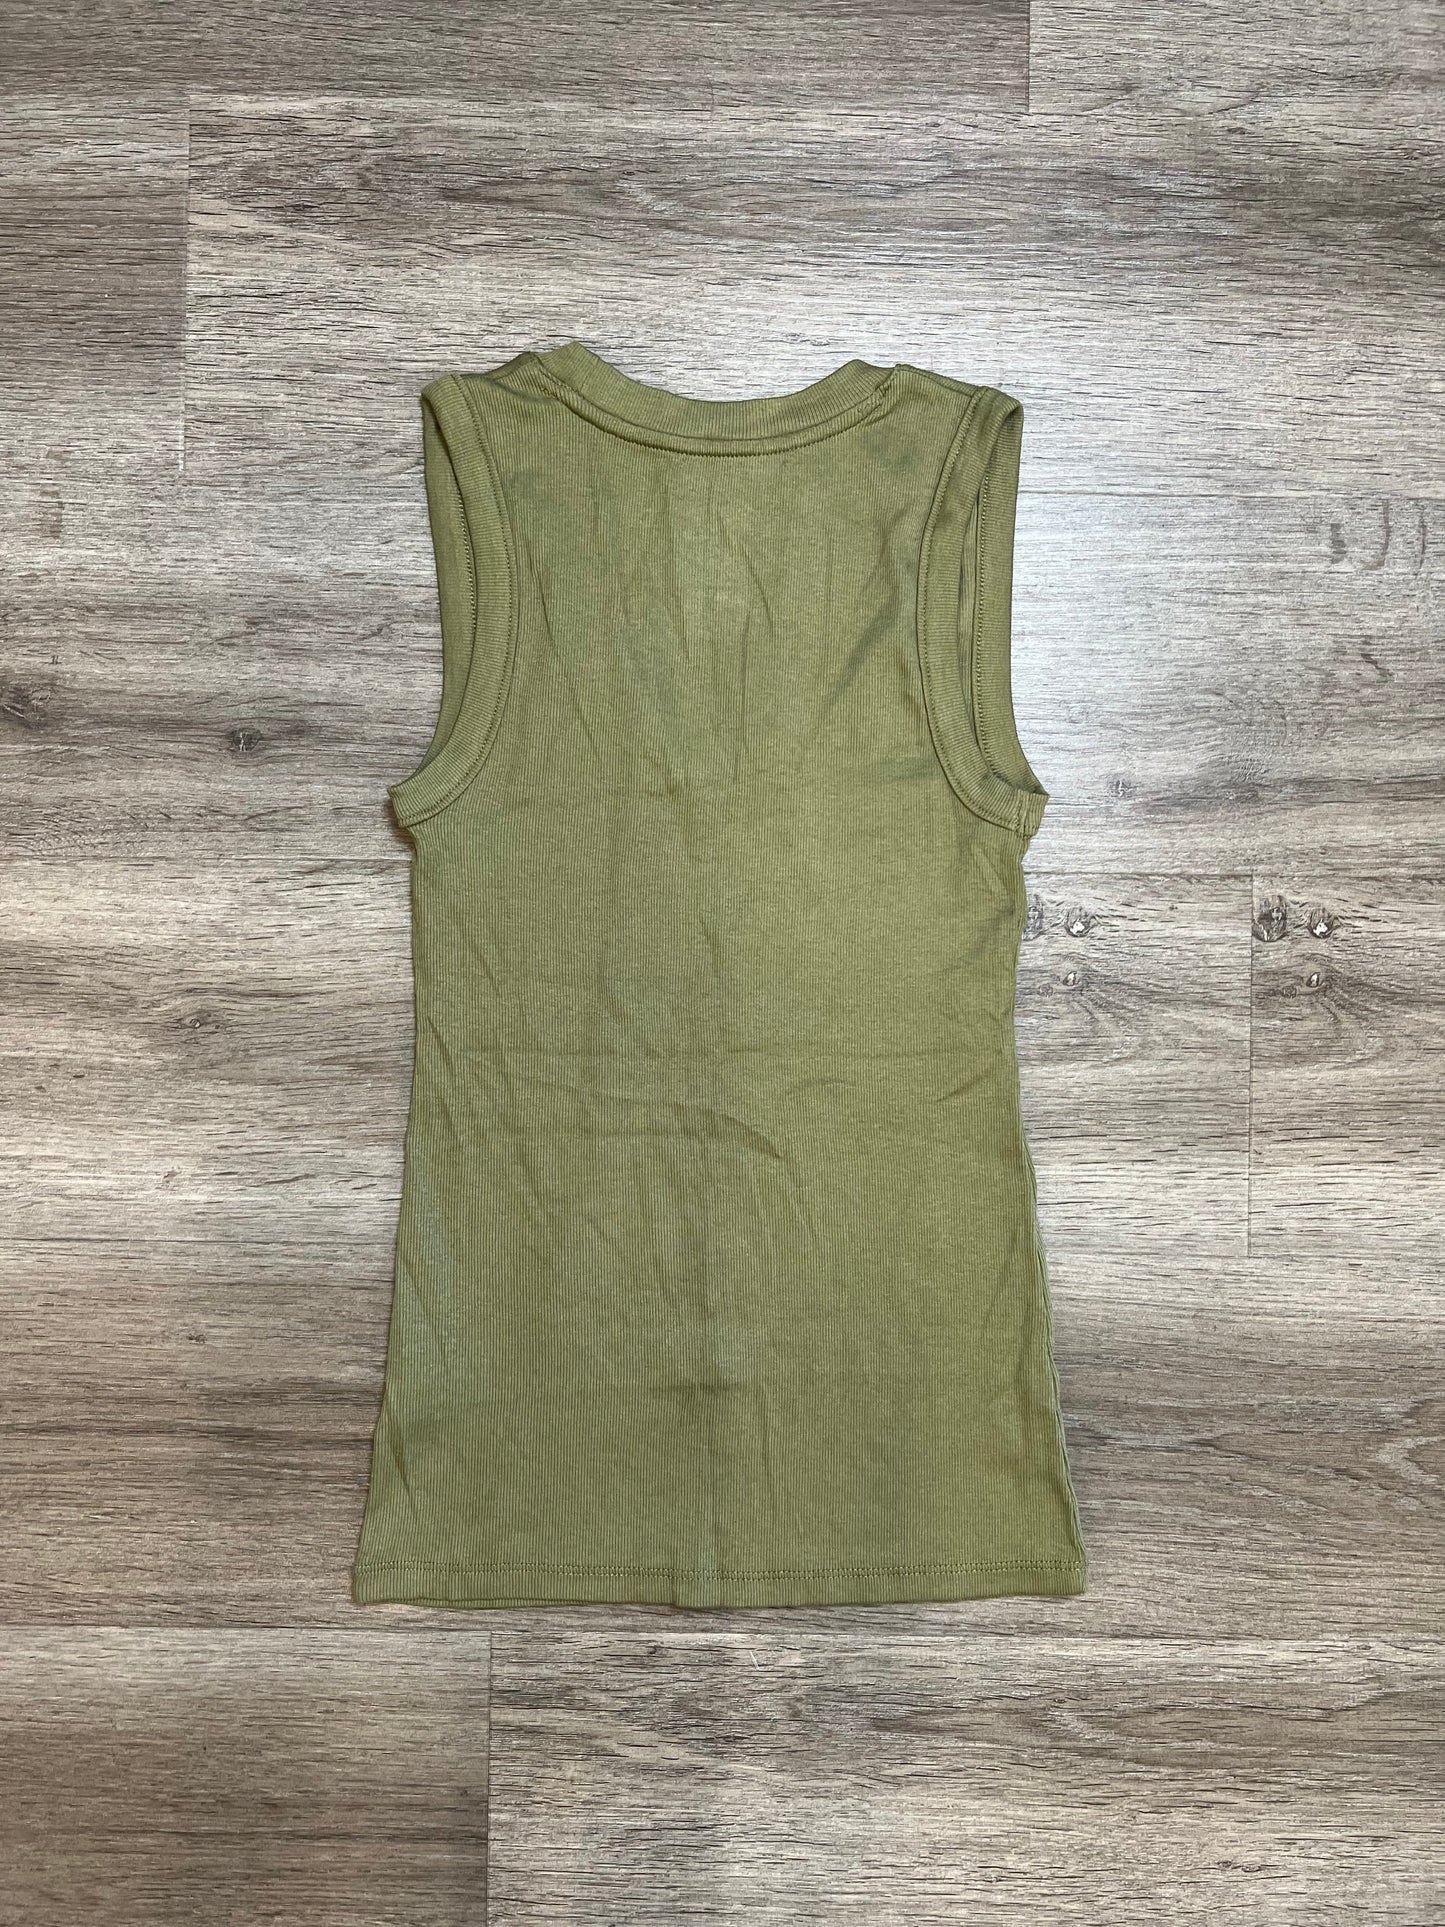 Tank Top By A New Day  Size: Xs